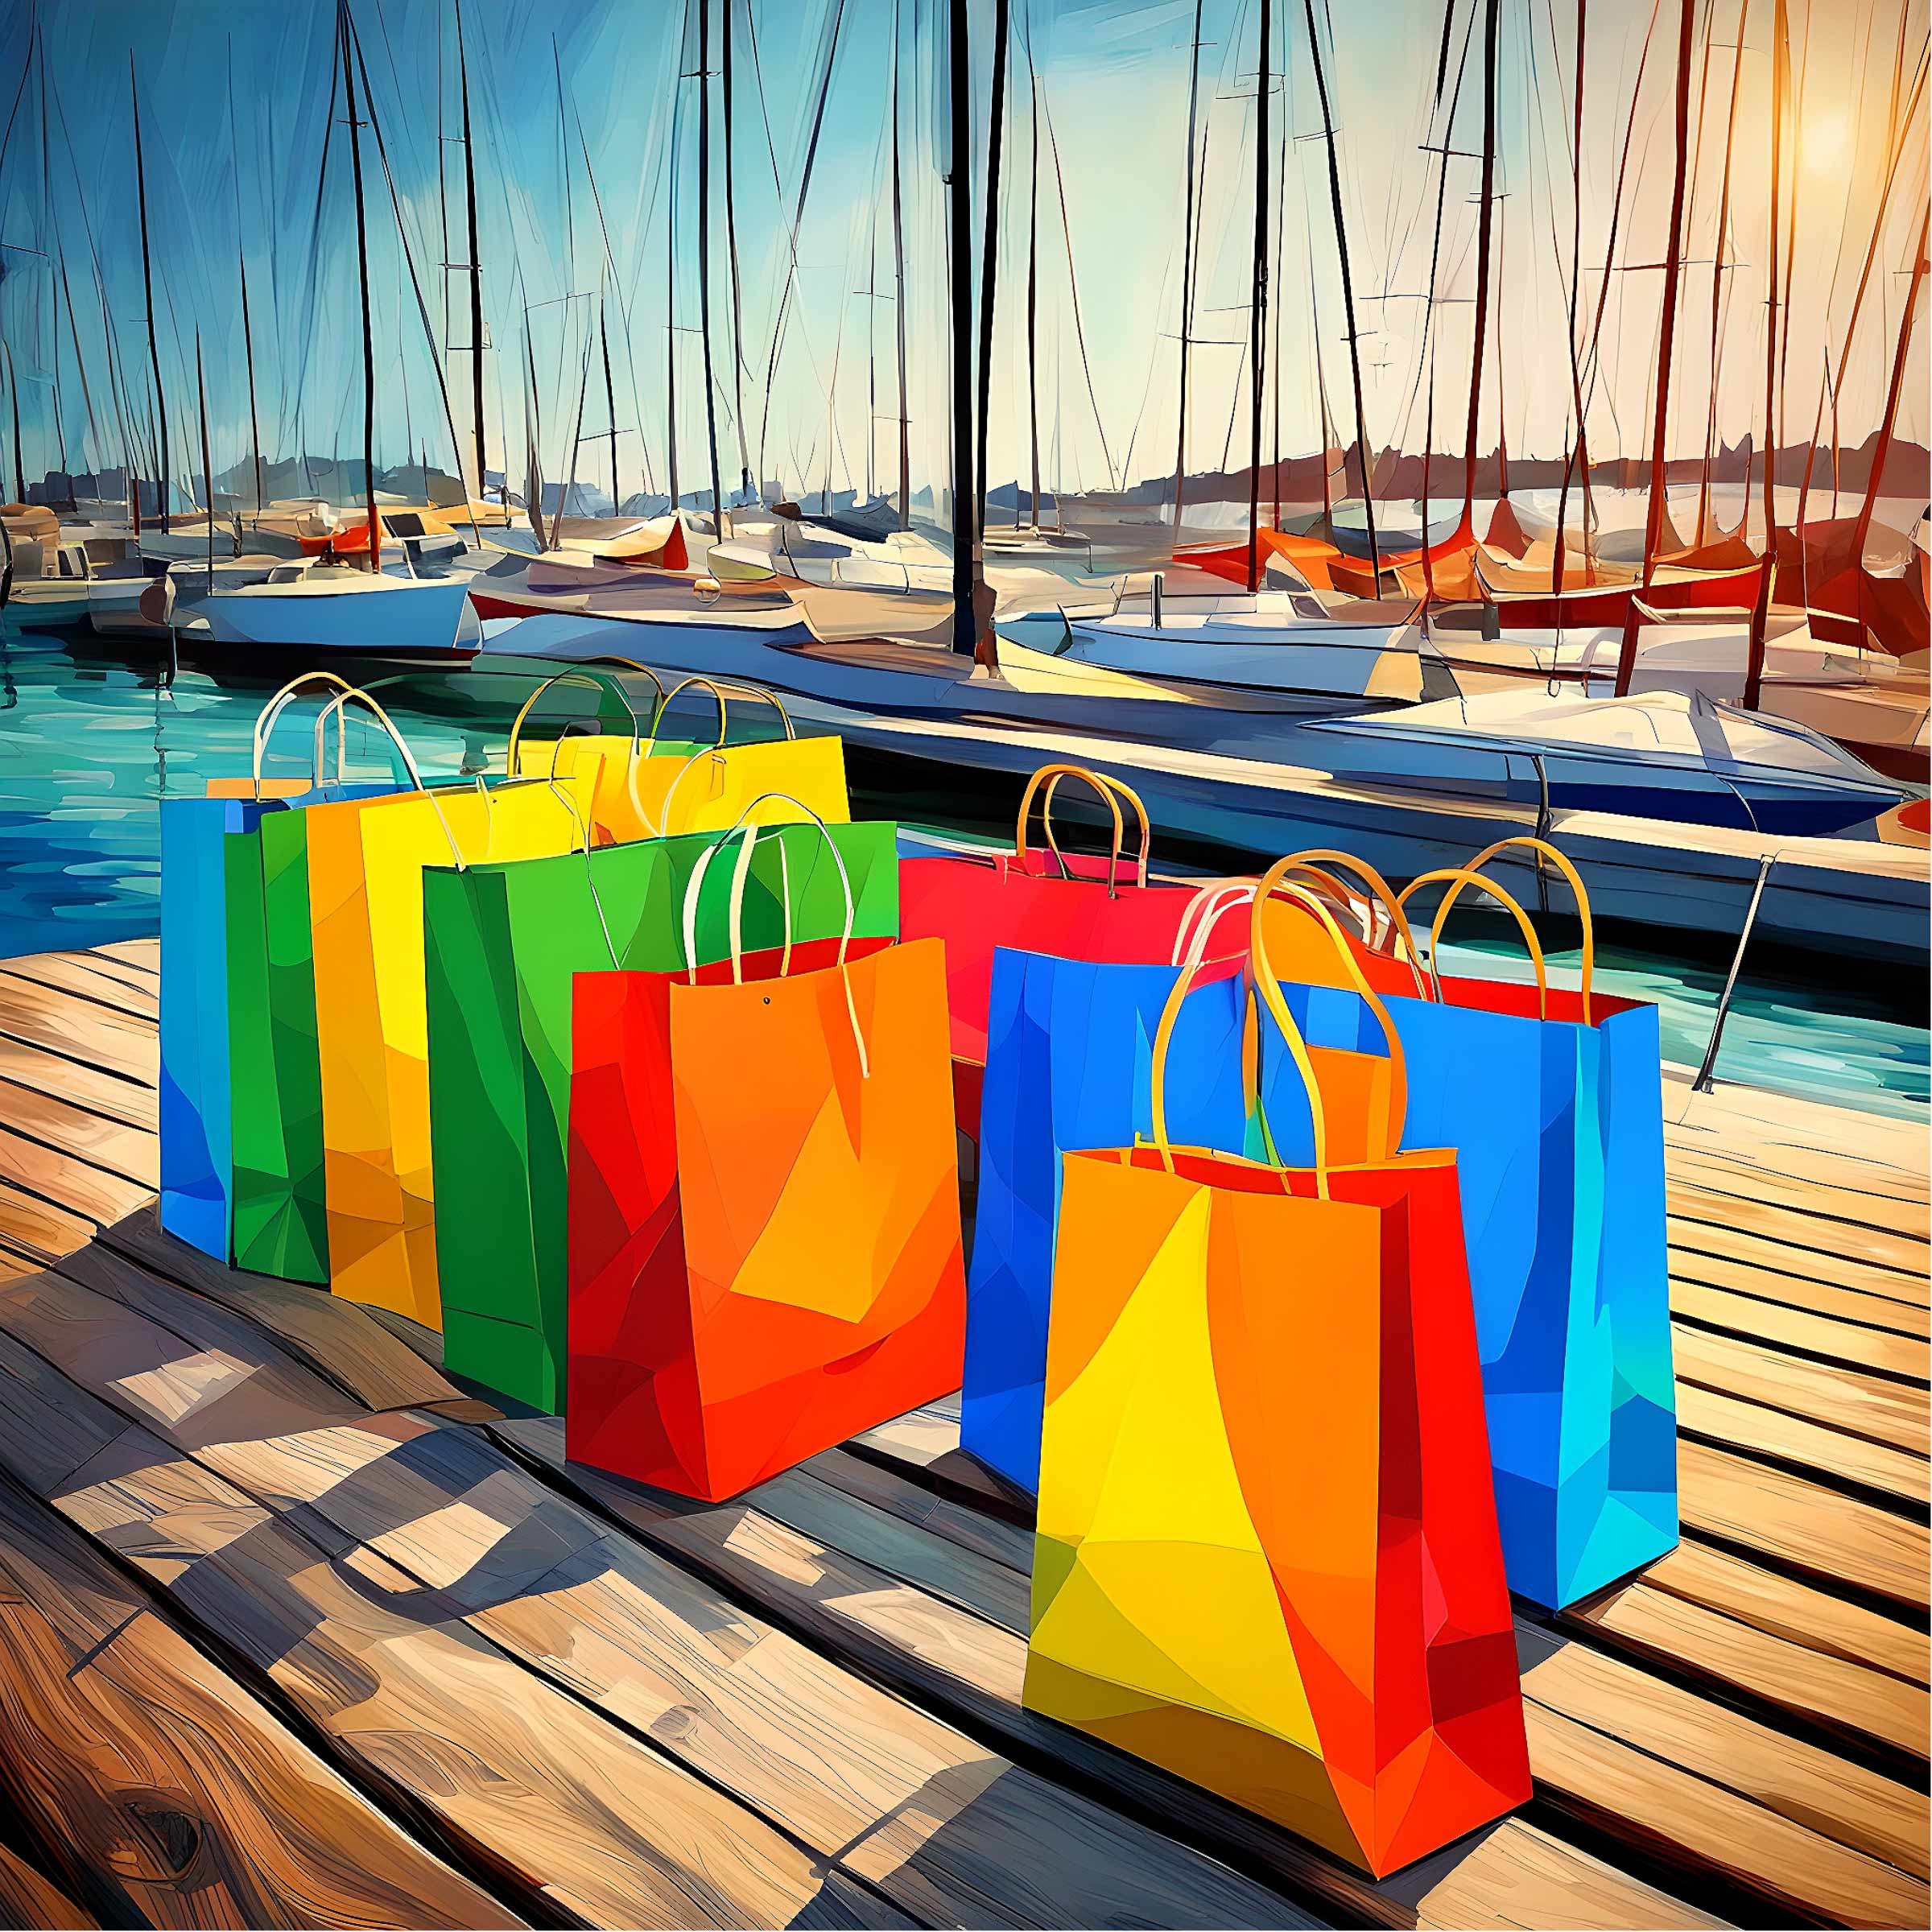 Painting style photo with colorful shopping bags on a dock with sailboats